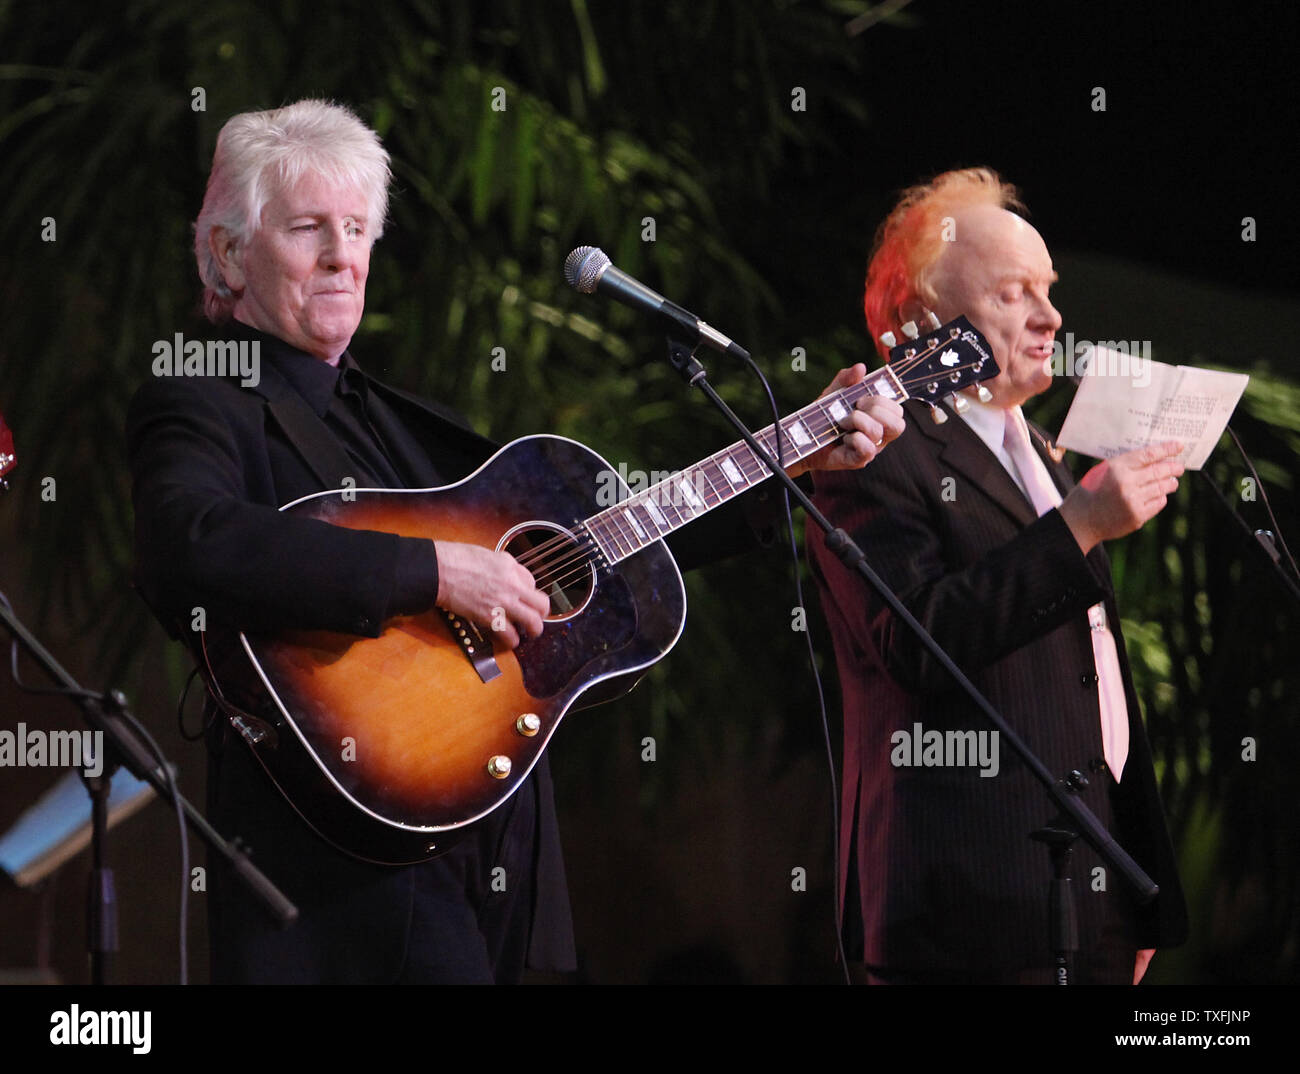 Graham Nash (L) performs with Peter Asher during a tribute concert memorializing Buddy Holly, J.P. 'The Big Booper' Richardson and Ritchie Valens at the Surf Ballroom in Clear Lake, Iowa on February 2, 2009. The three rock 'n' roll pioneers played their last show at the Surf Ballroom 50 years ago to the day. Singer Don McLean coined the phrase 'the day the music died' in his hit song American Pie referring to the death of the plane crash that killed the three stars in the early morning hours of February 3, 1959.  (UPI Photo/Brian Kersey) Stock Photo